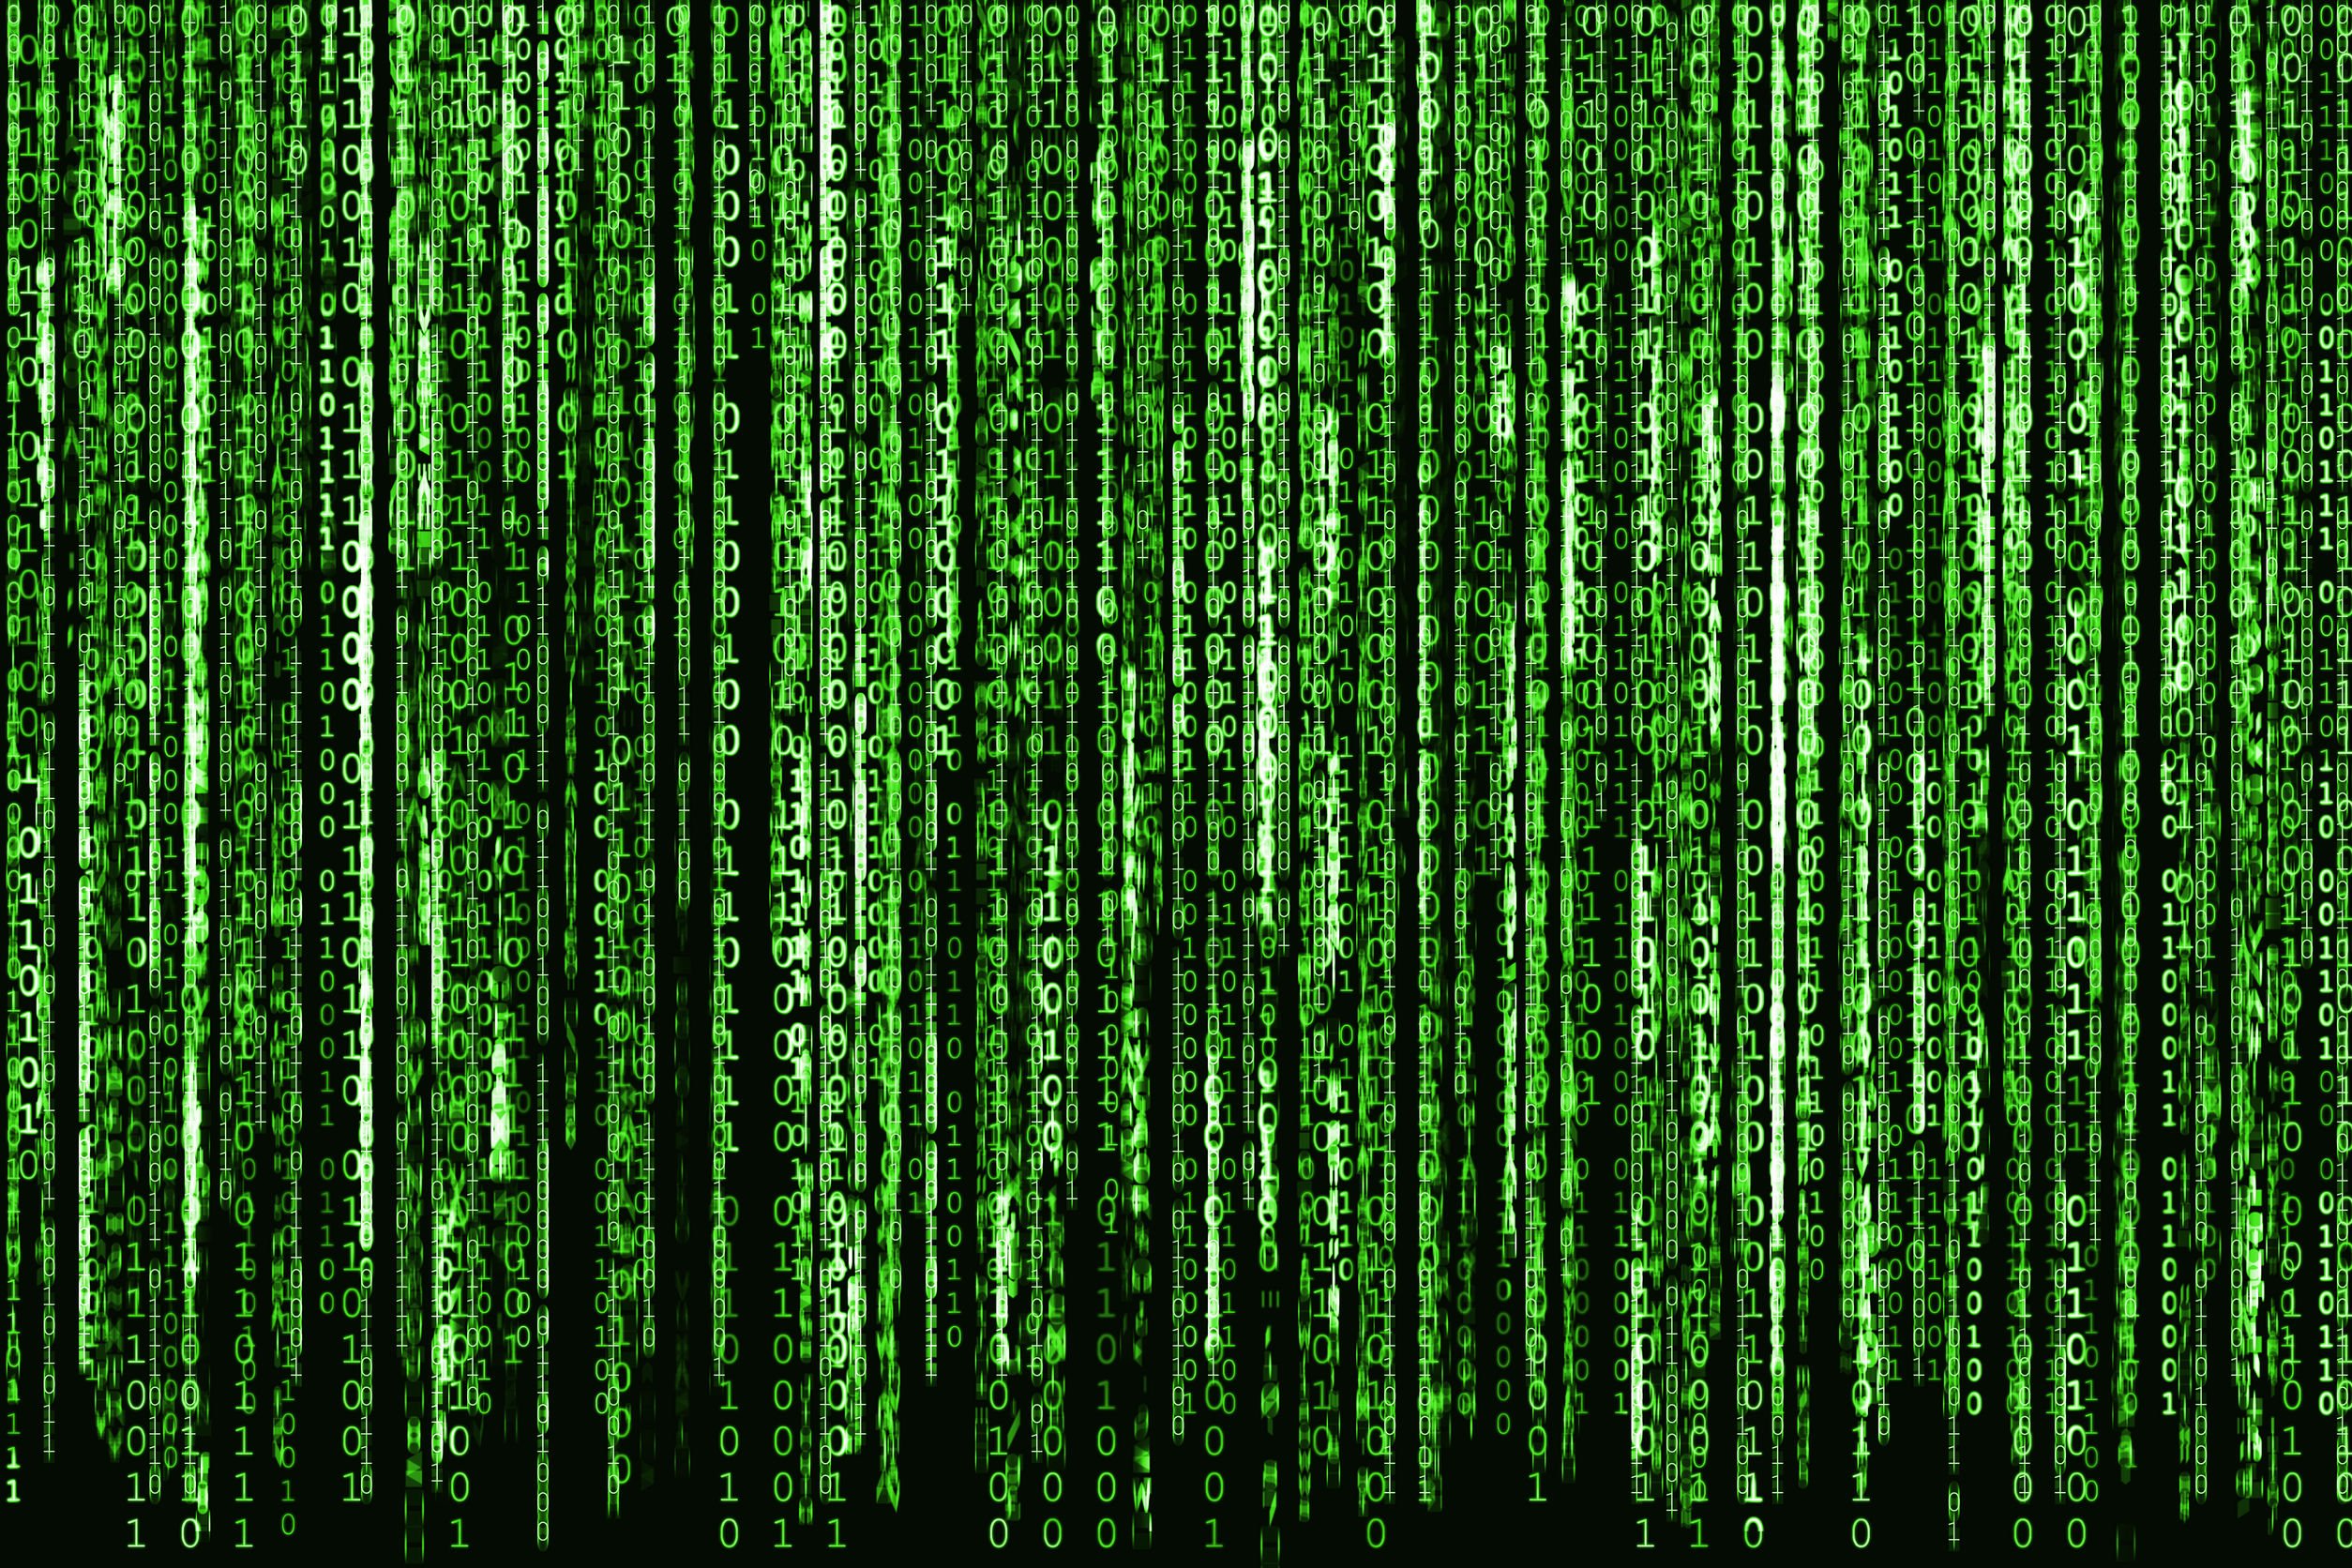 A picture of the Matrix, where everyone suffers from imposter syndrome if you think about it.